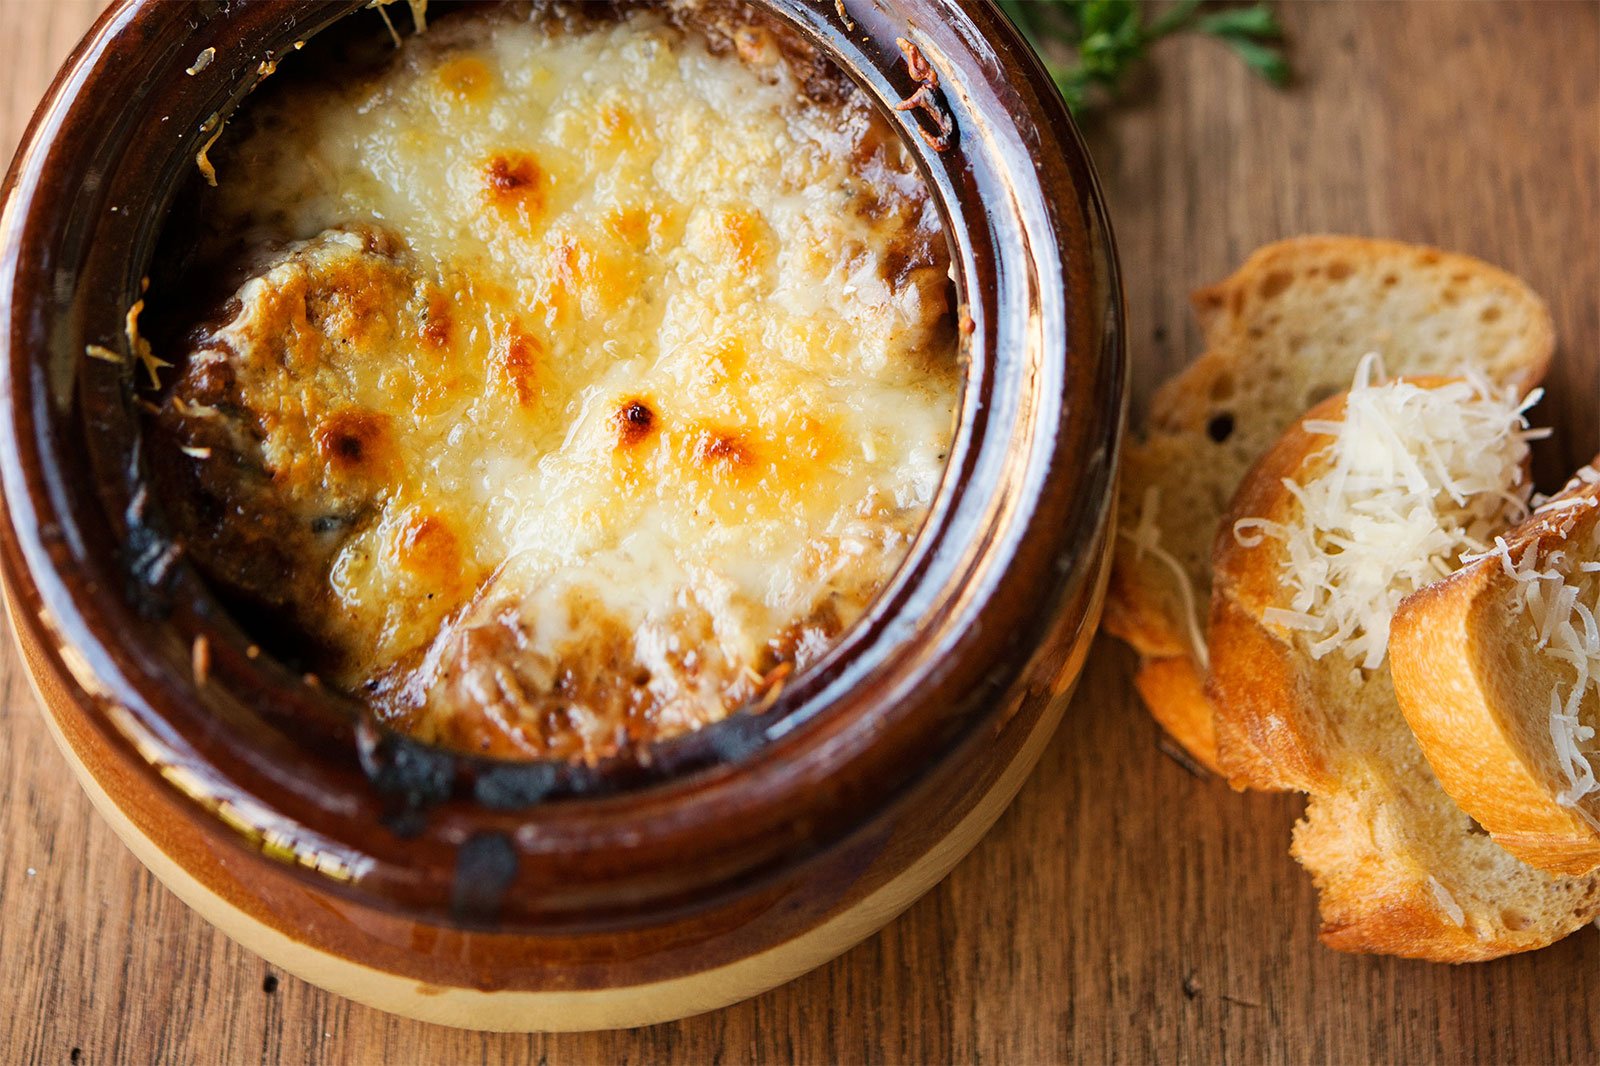 How to try onion soup in Paris